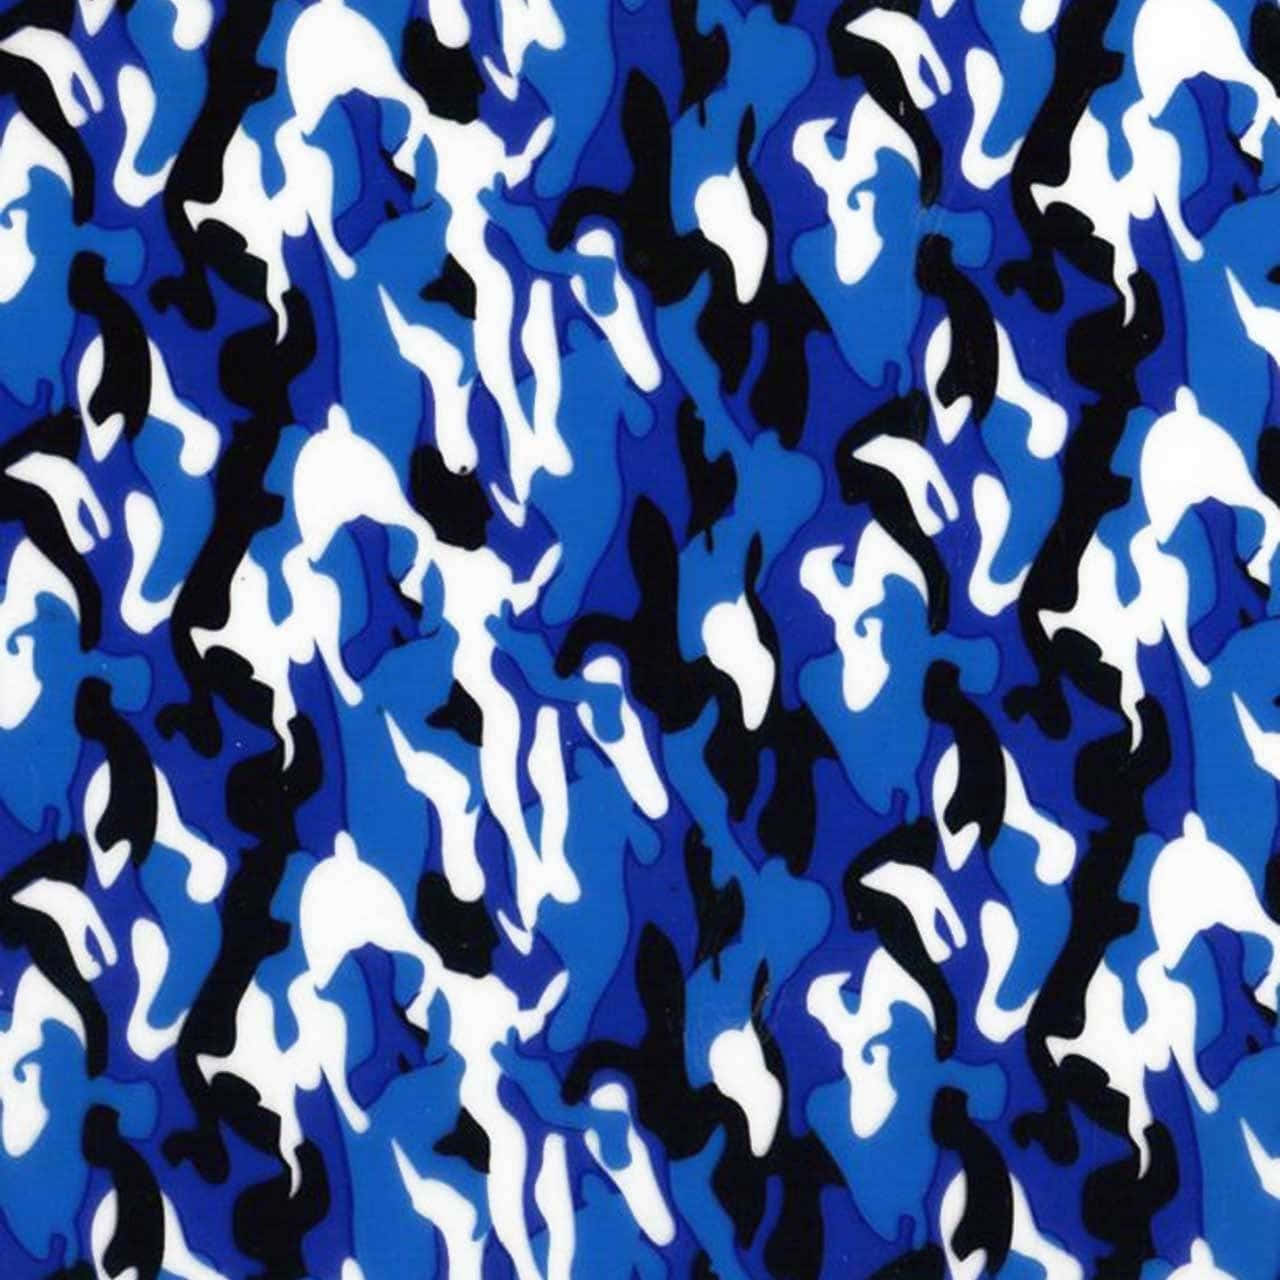 Stay stylish and up to date in this sleek blue Bape camo. Wallpaper